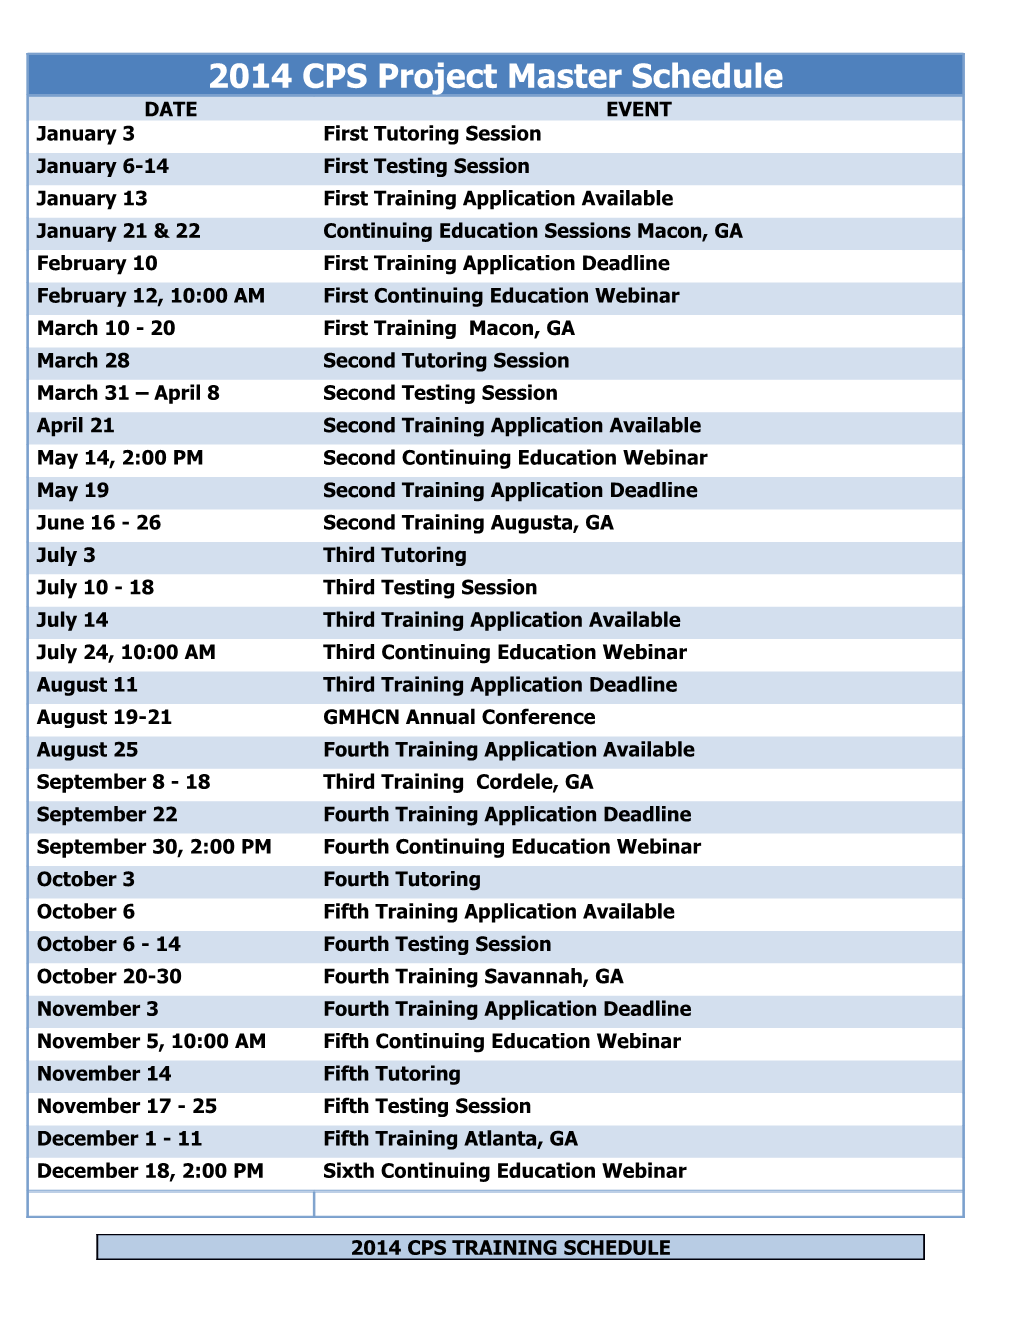 Proposed 2010 CPS Project Schedule